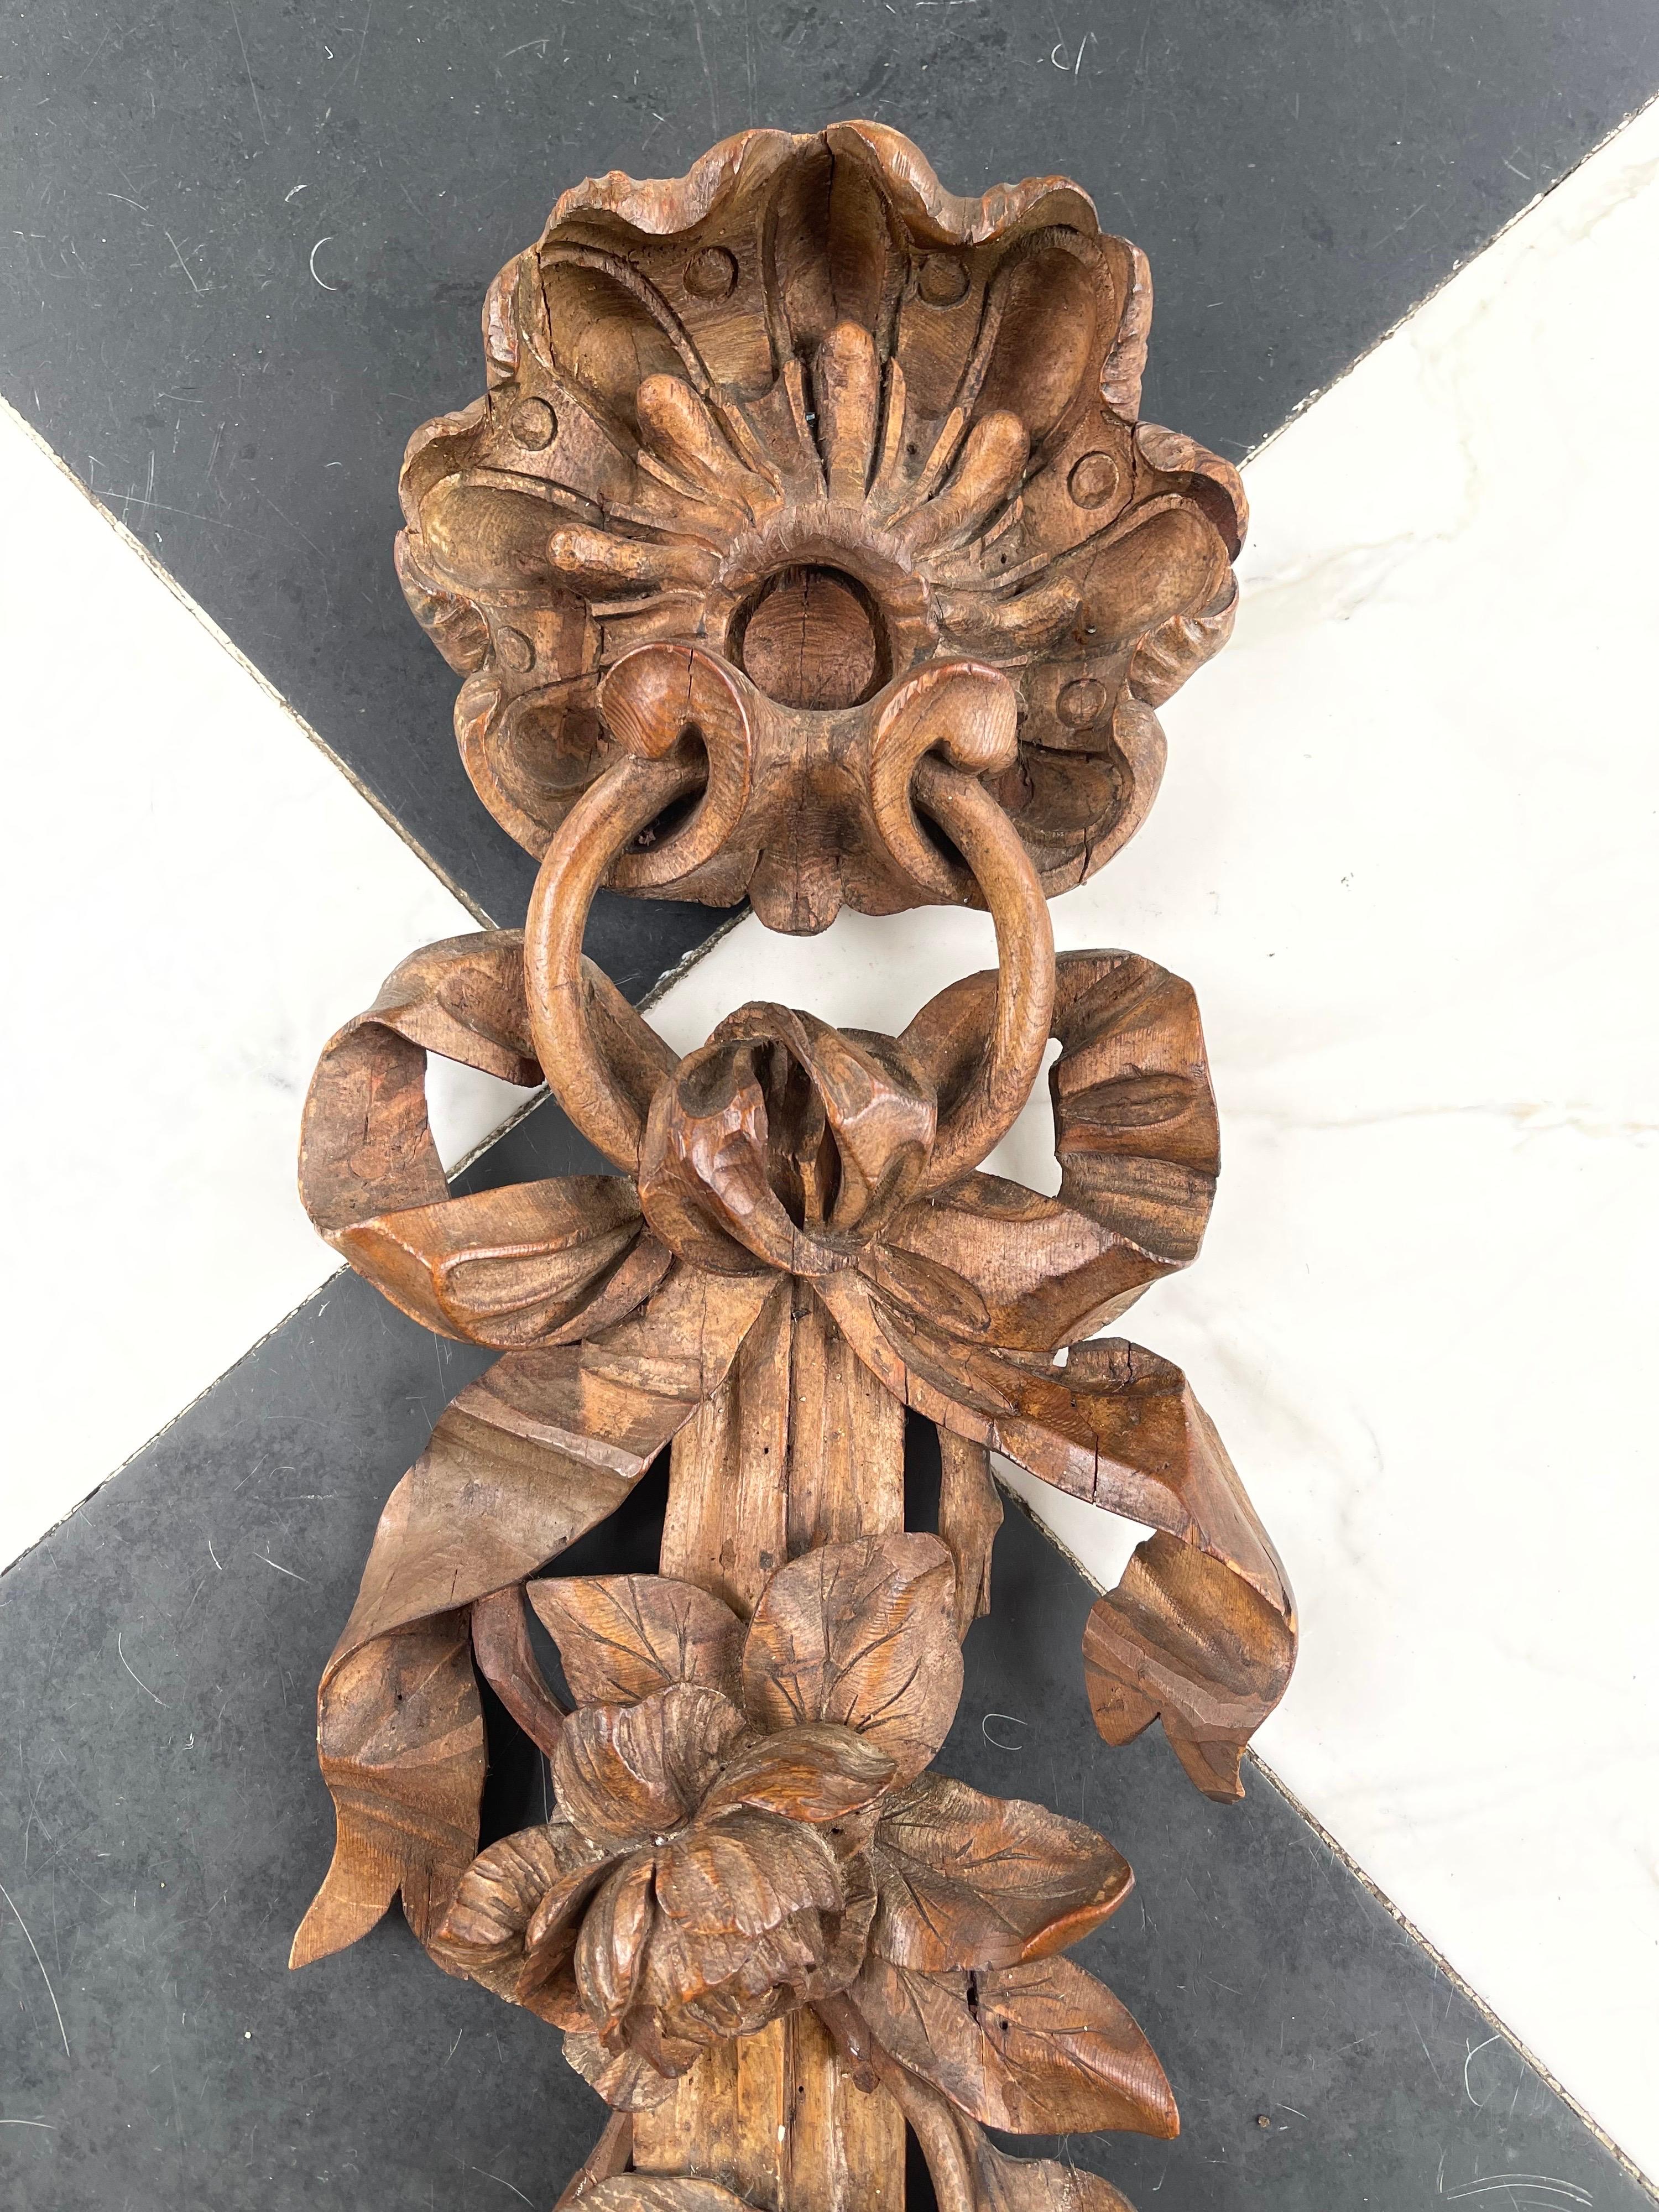 An exceptional pair of English wall carvings in the manner of the master carver Grinling Gibbons (1648-1721).
The hand who carved these three dimensional fruit, flowers, vegetables and leaves are hanging from a ribbon attached to a shell. They date